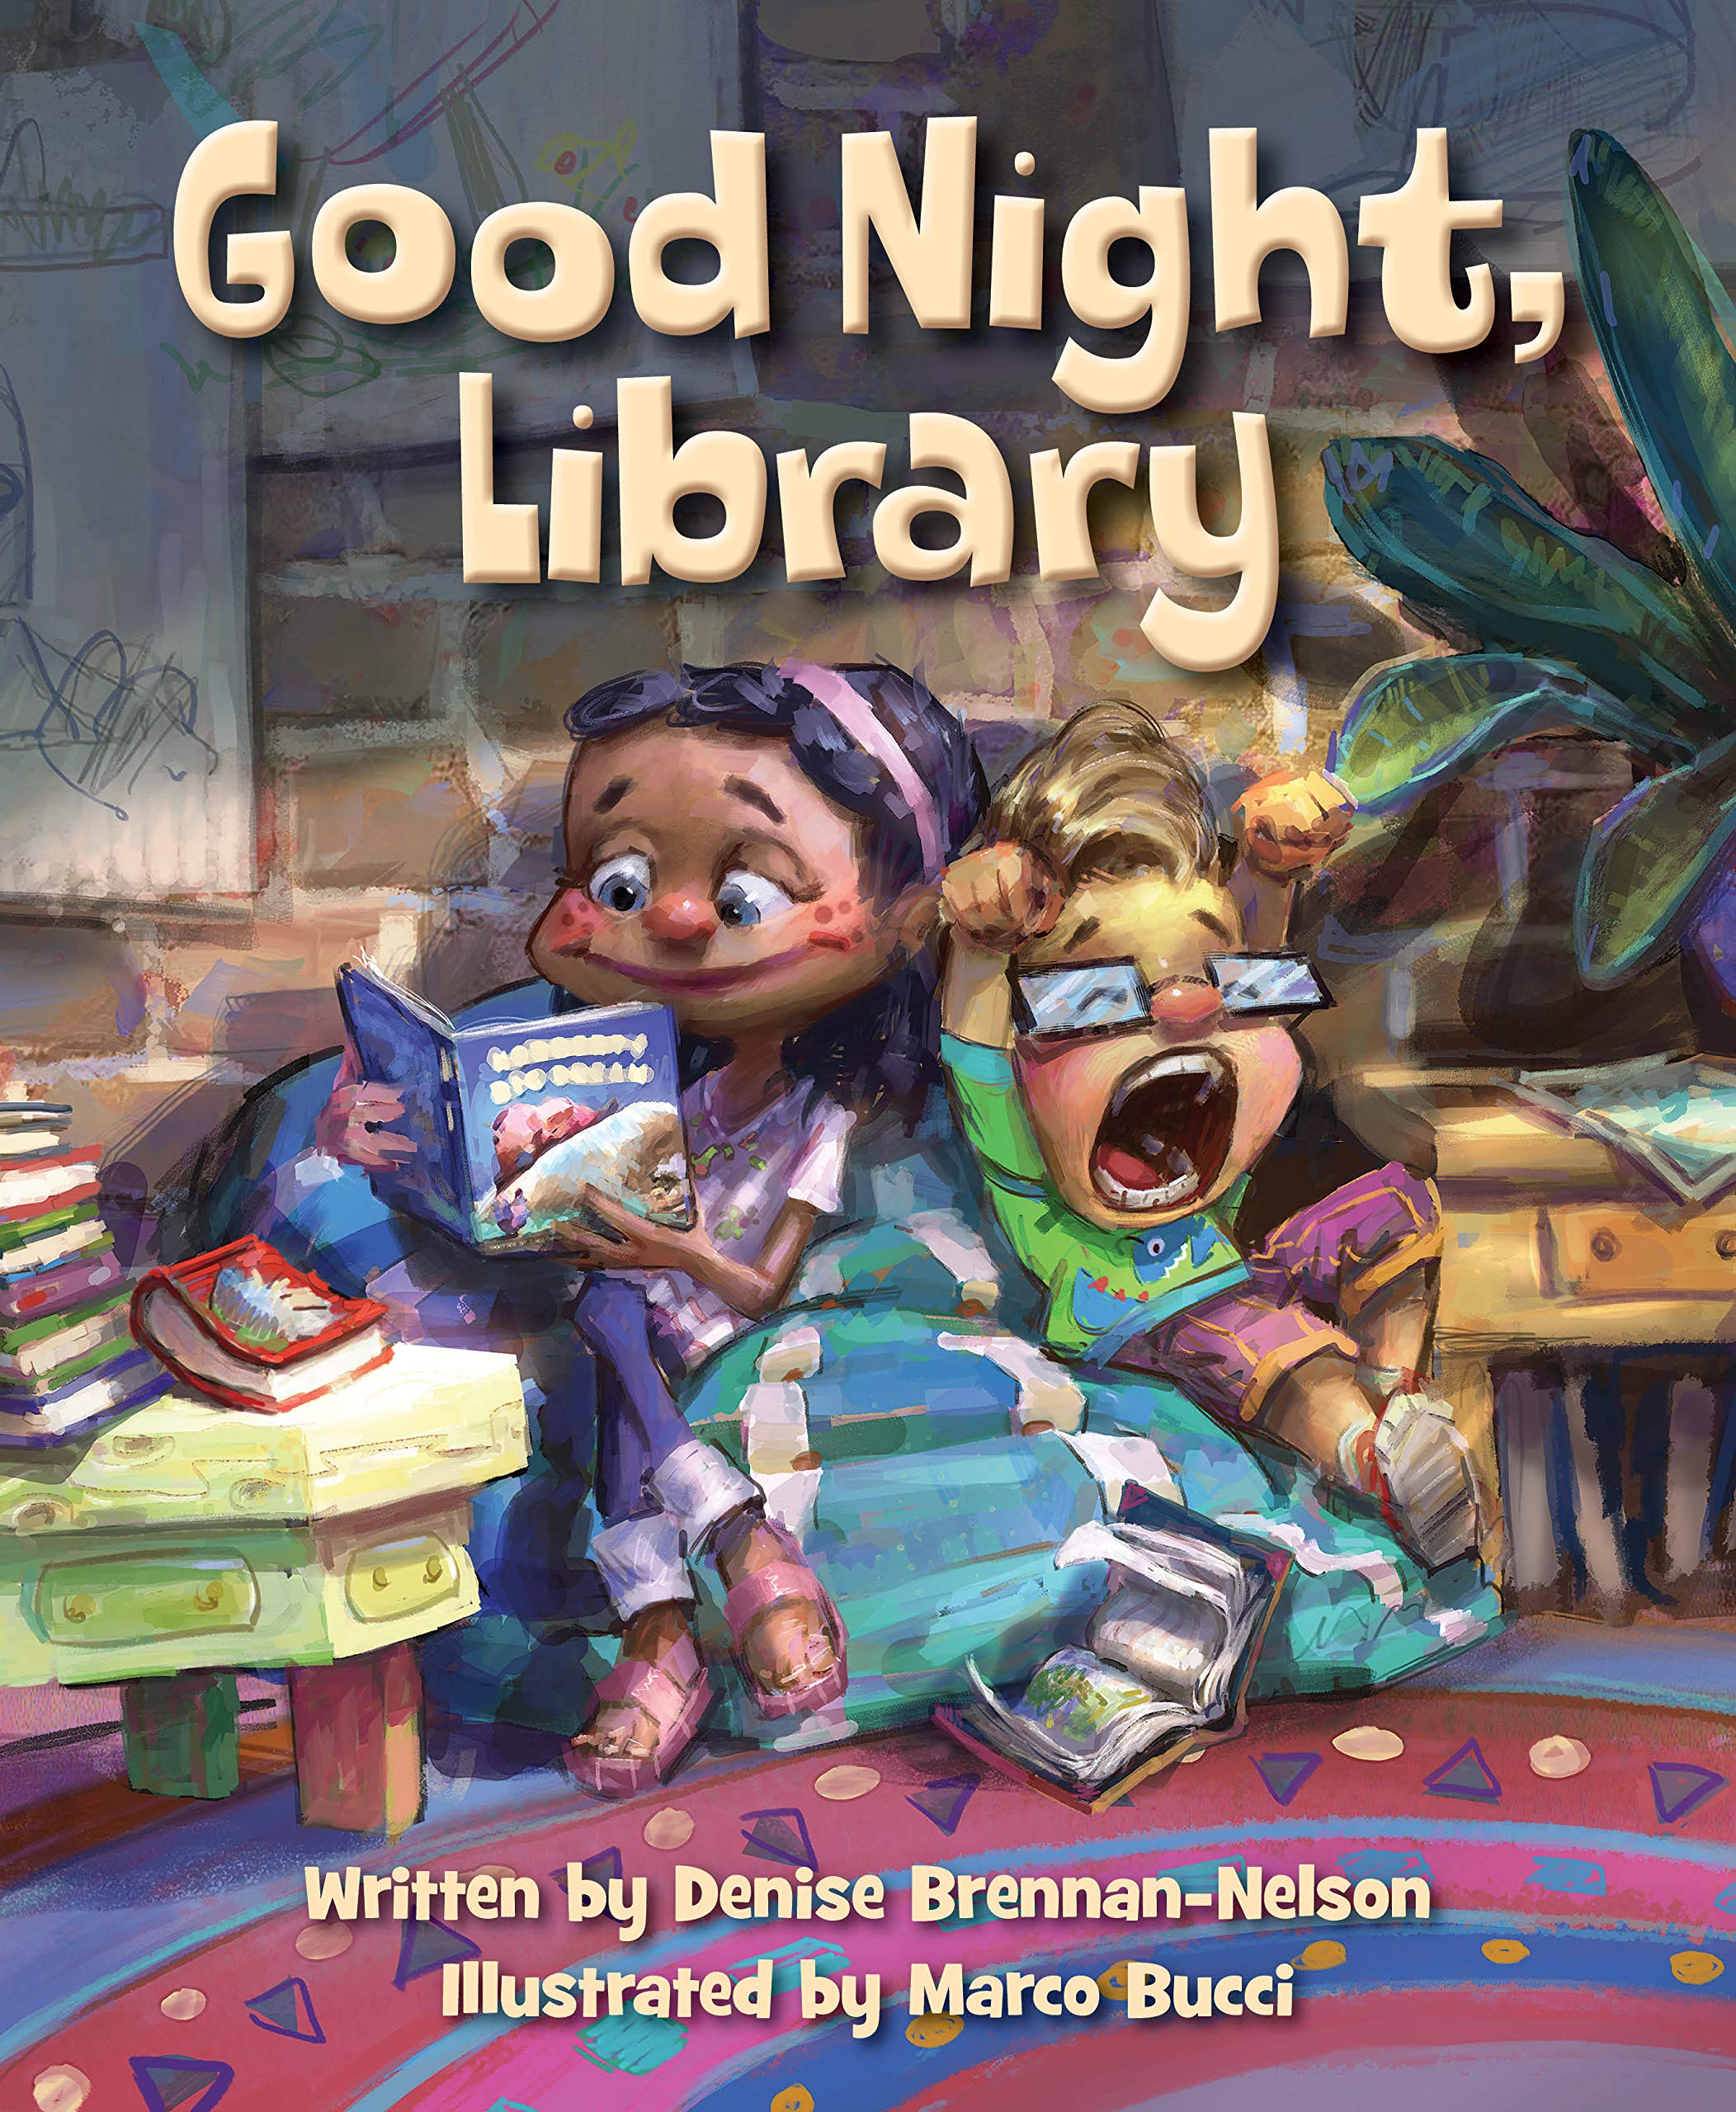 Good Night, Library - Manhattan Book Review